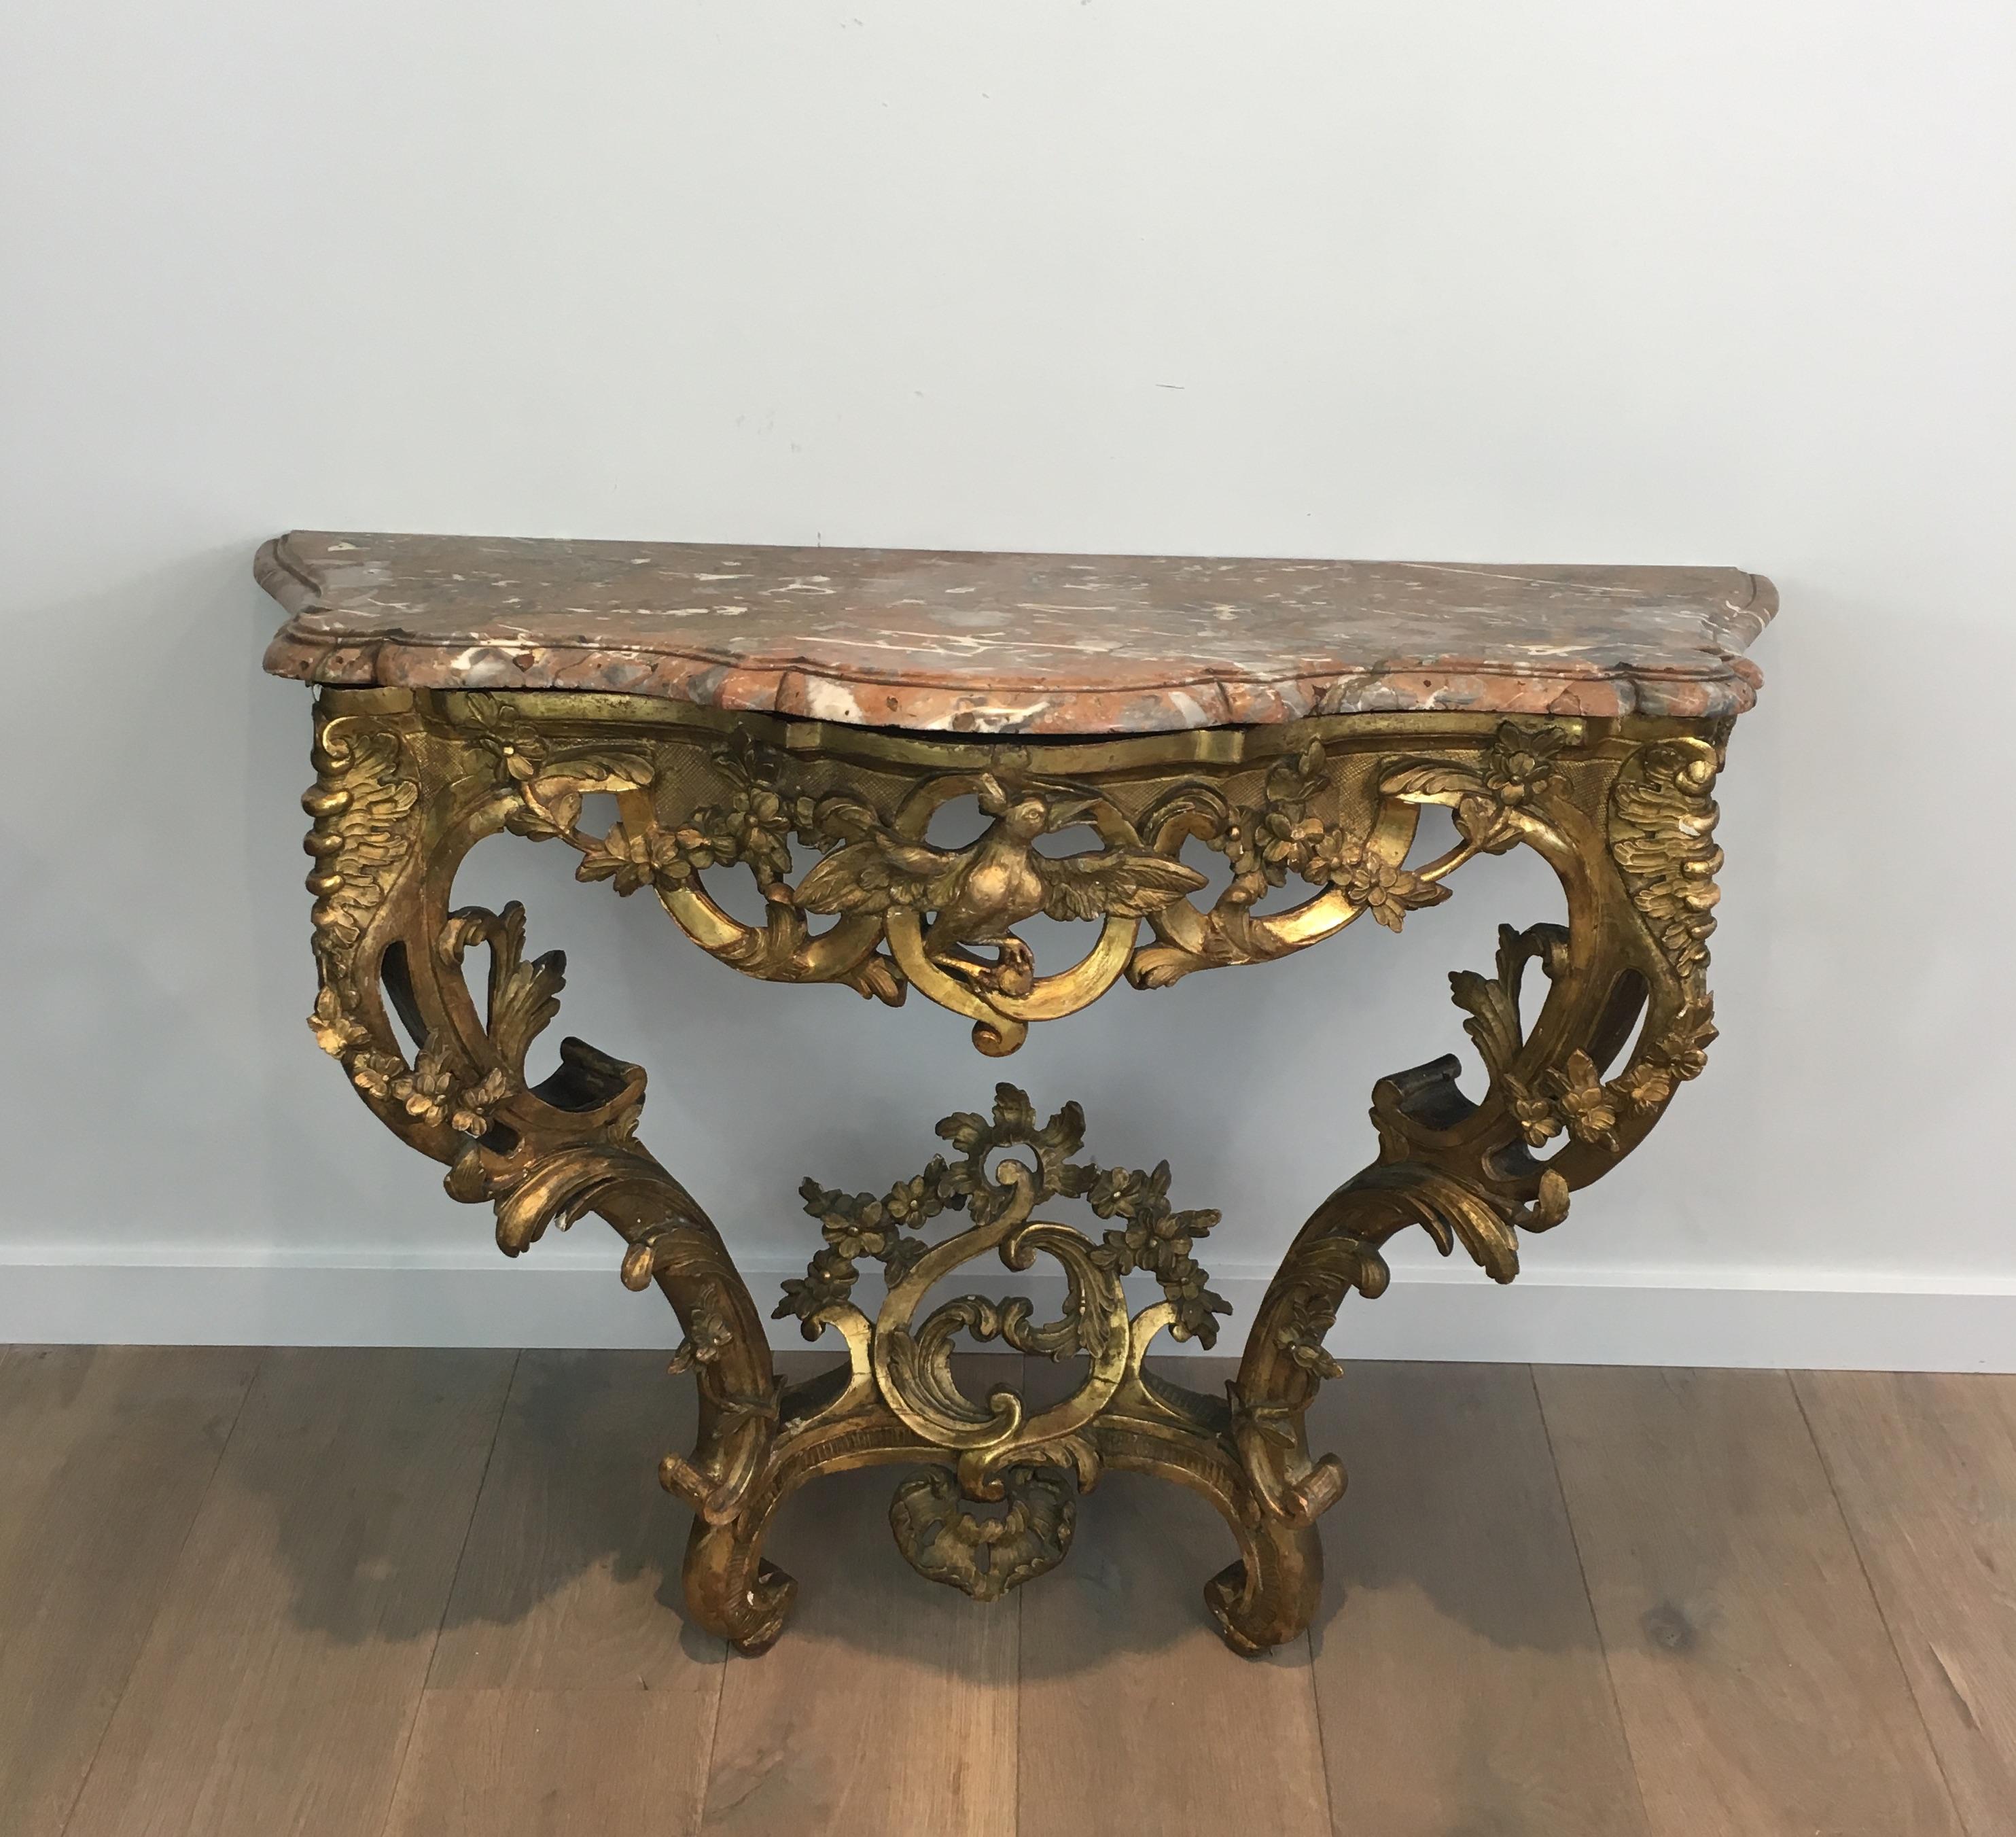 A French Louis XV period carved wood console table with marble top from the 18th century. This French console table features a shaped veined marble top sitting over a very fine and rich carved wooden base. The center of the apron showcases a bird of